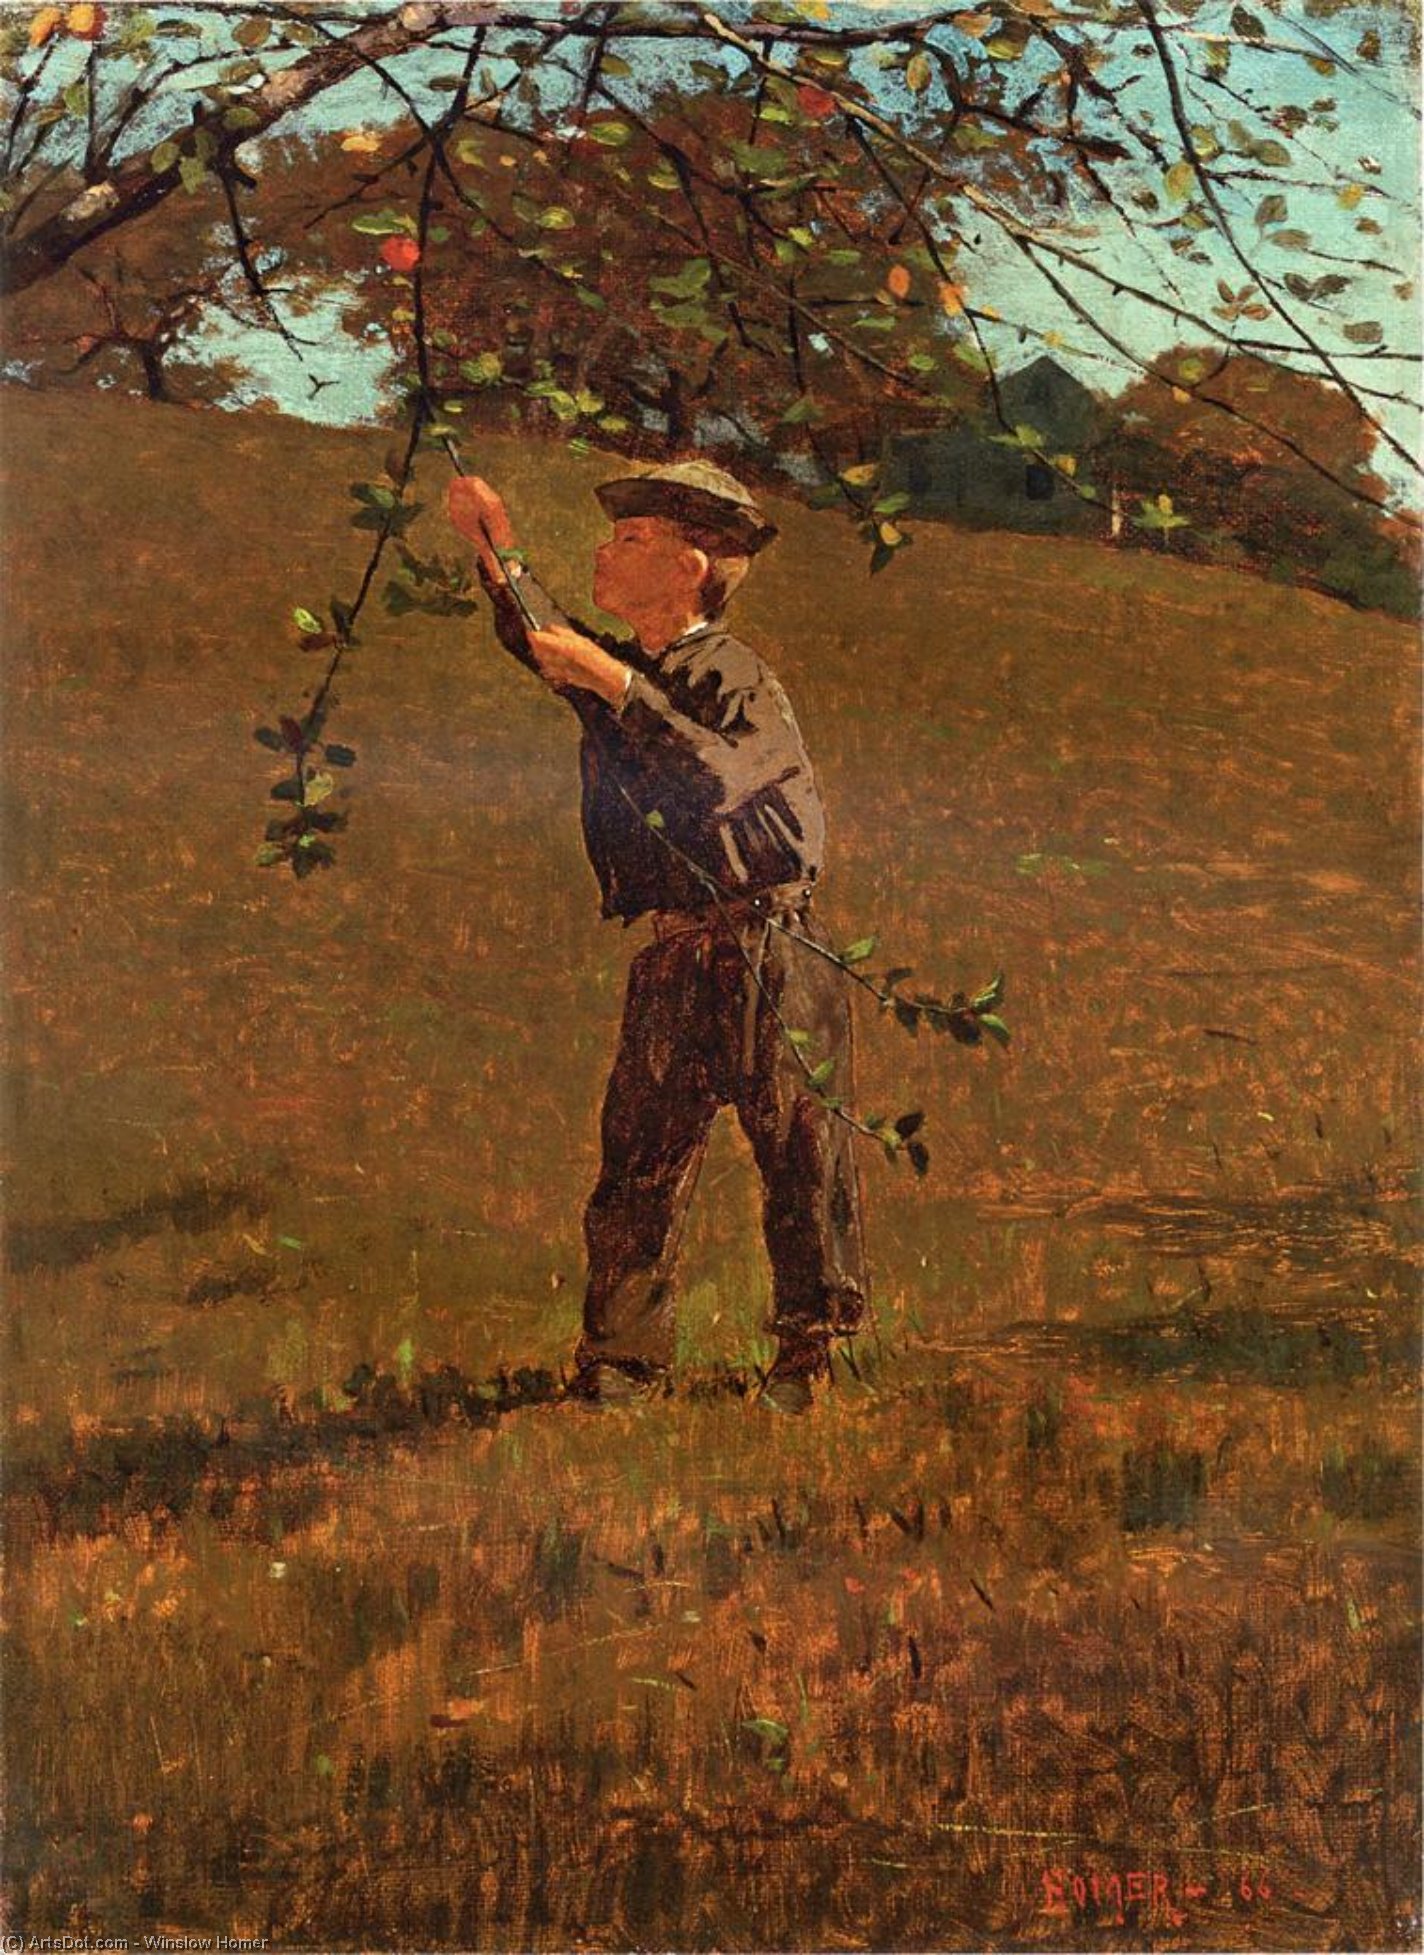 Order Paintings Reproductions Green Apples, 1866 by Winslow Homer (1836-1910, United States) | ArtsDot.com